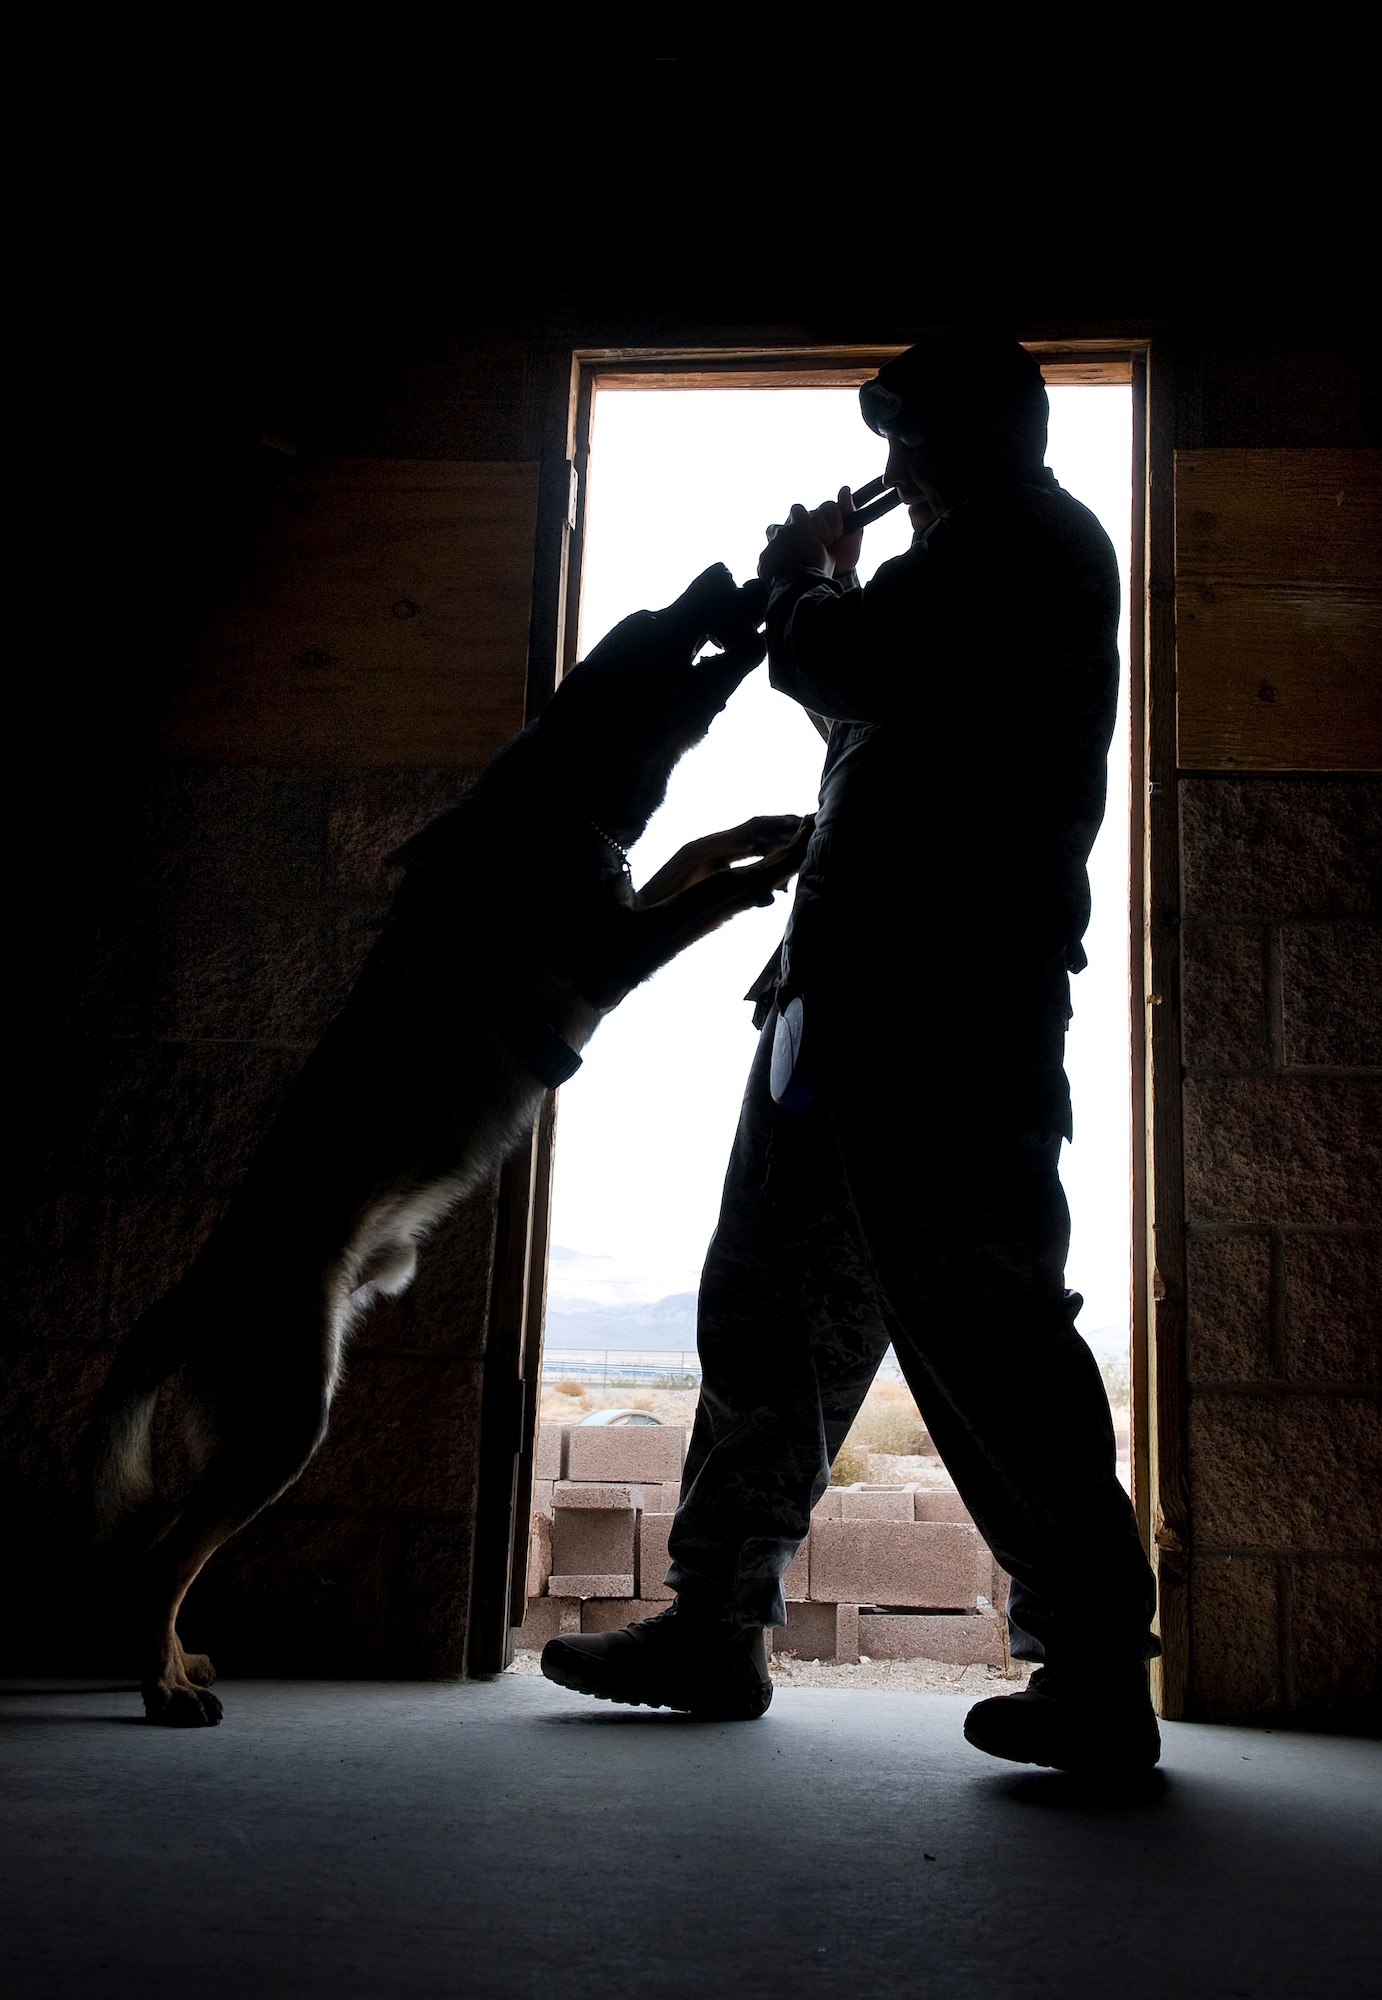 NELLIS AIR FORCE BASE, Nev. -- Senior Airman Felipe Alvarado, 99th Security Forces Squadron military working dog handler, rewards Pike, a military working dog, with a chew toy after he discovered explosive ordnance during a joint explosive detection training exercise Dec. 16. Military working dog handlers from the 99th Security Forces Squadron worked with 25 canine teams from the Las Vegas area. (U.S. Air Force photo by Senior Airman Brett Clashman)